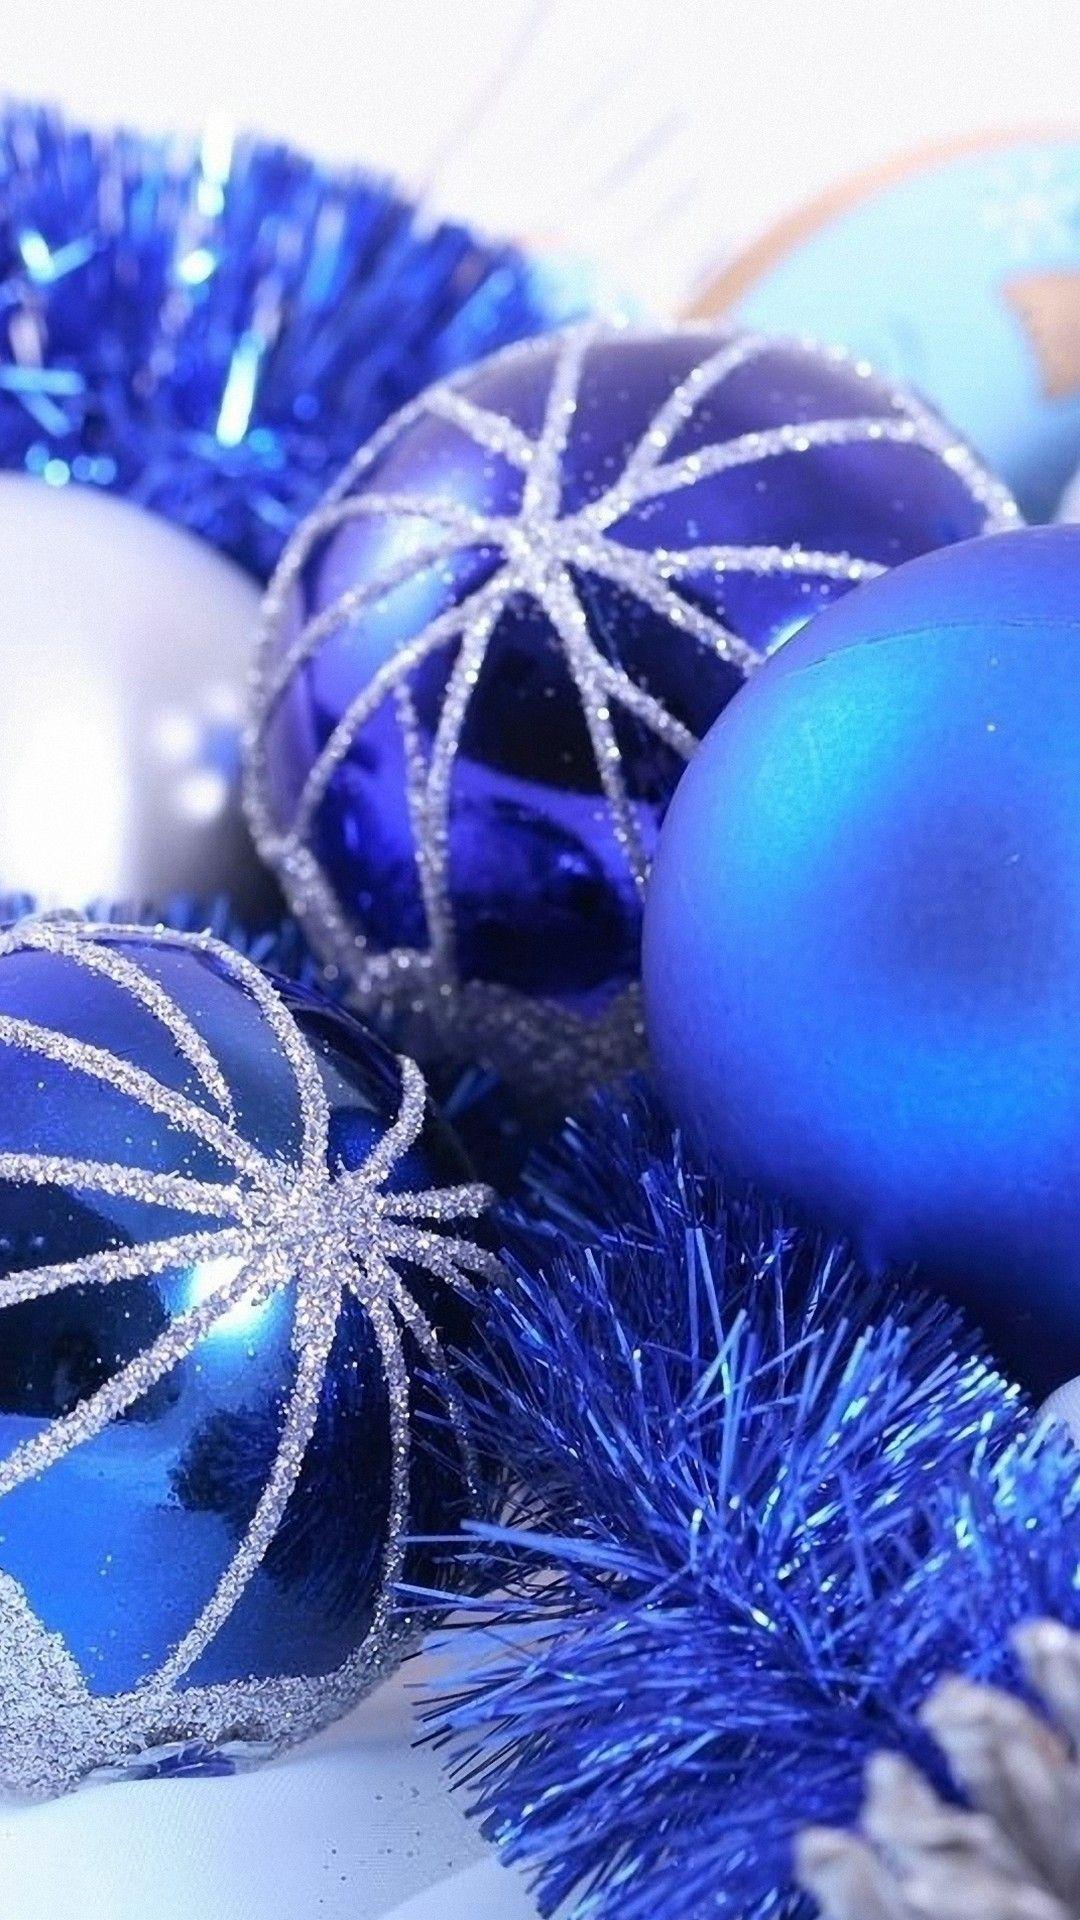 618600 Blue Christmas Stock Photos Pictures  RoyaltyFree Images   iStock  Blue christmas background Blue christmas tree Blue christmas  ornaments